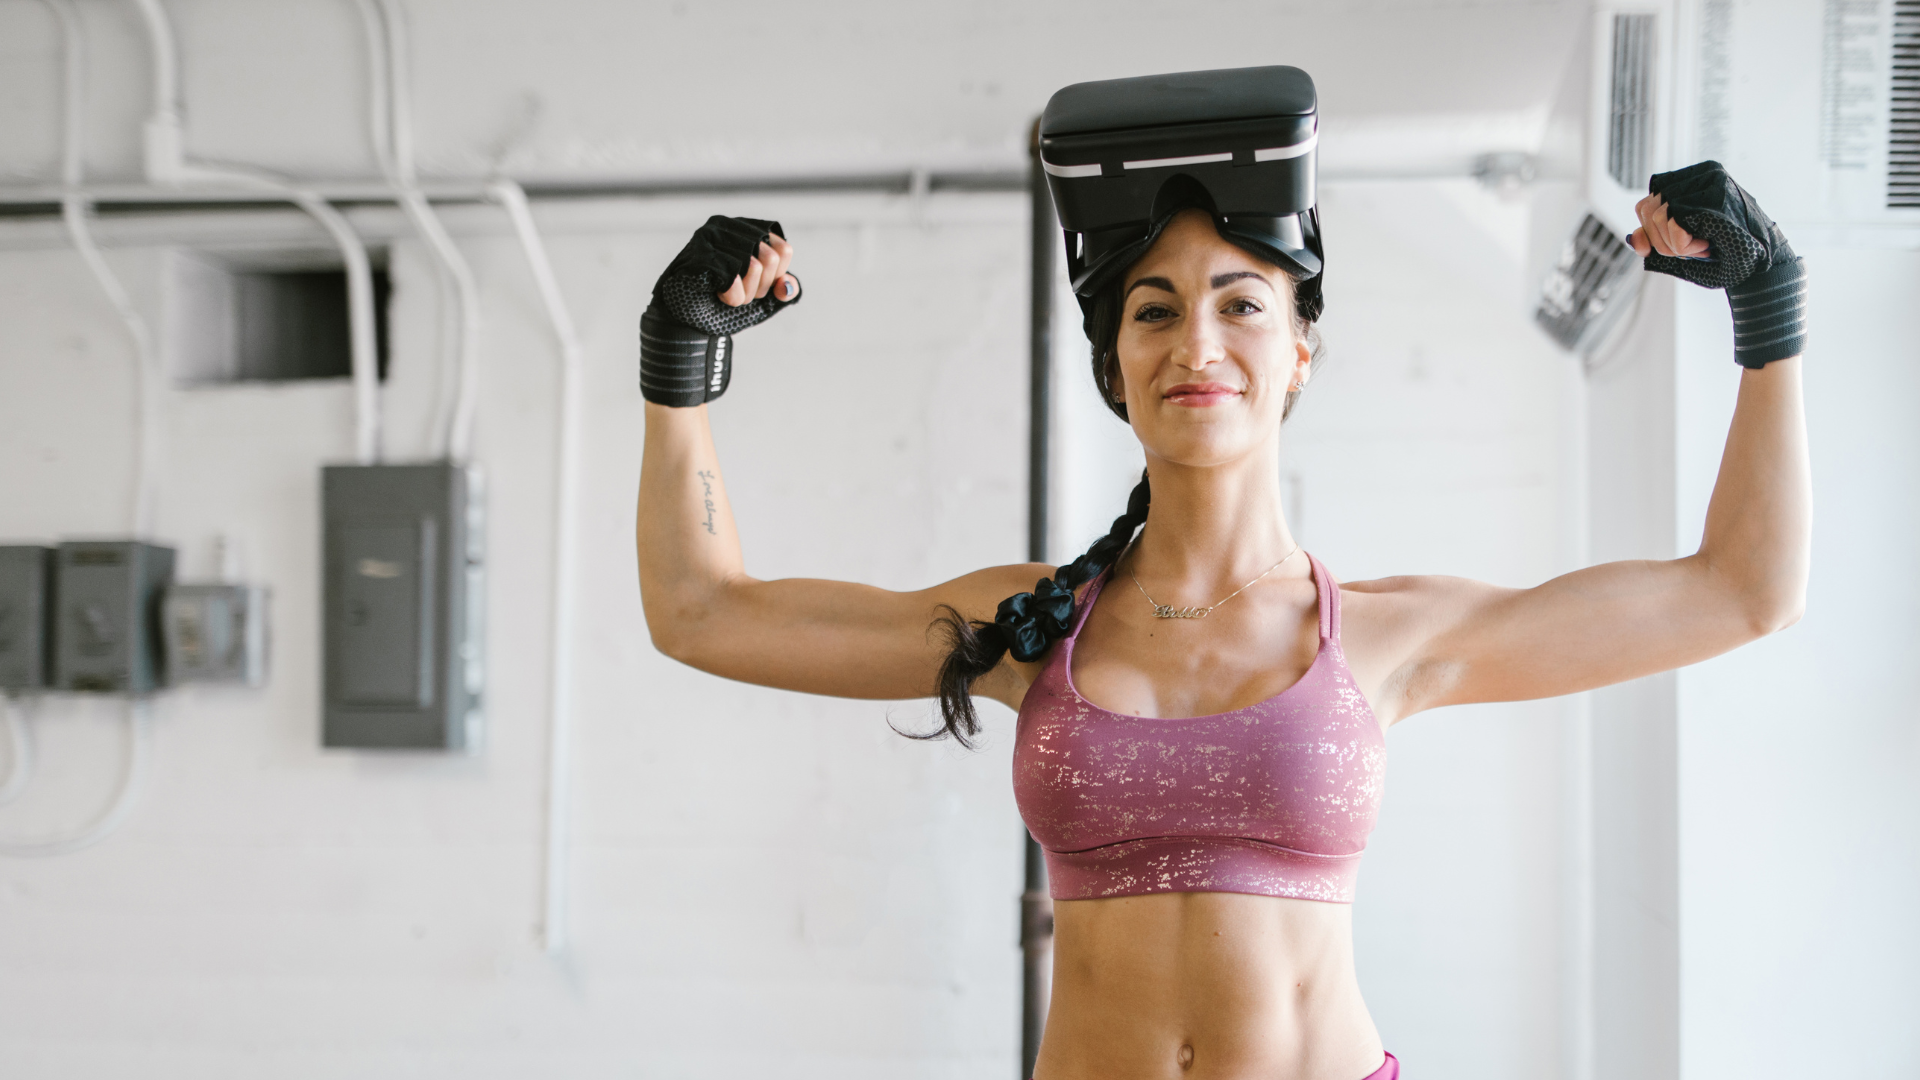 Is engagement higher for VR fitness than via a mobile app?